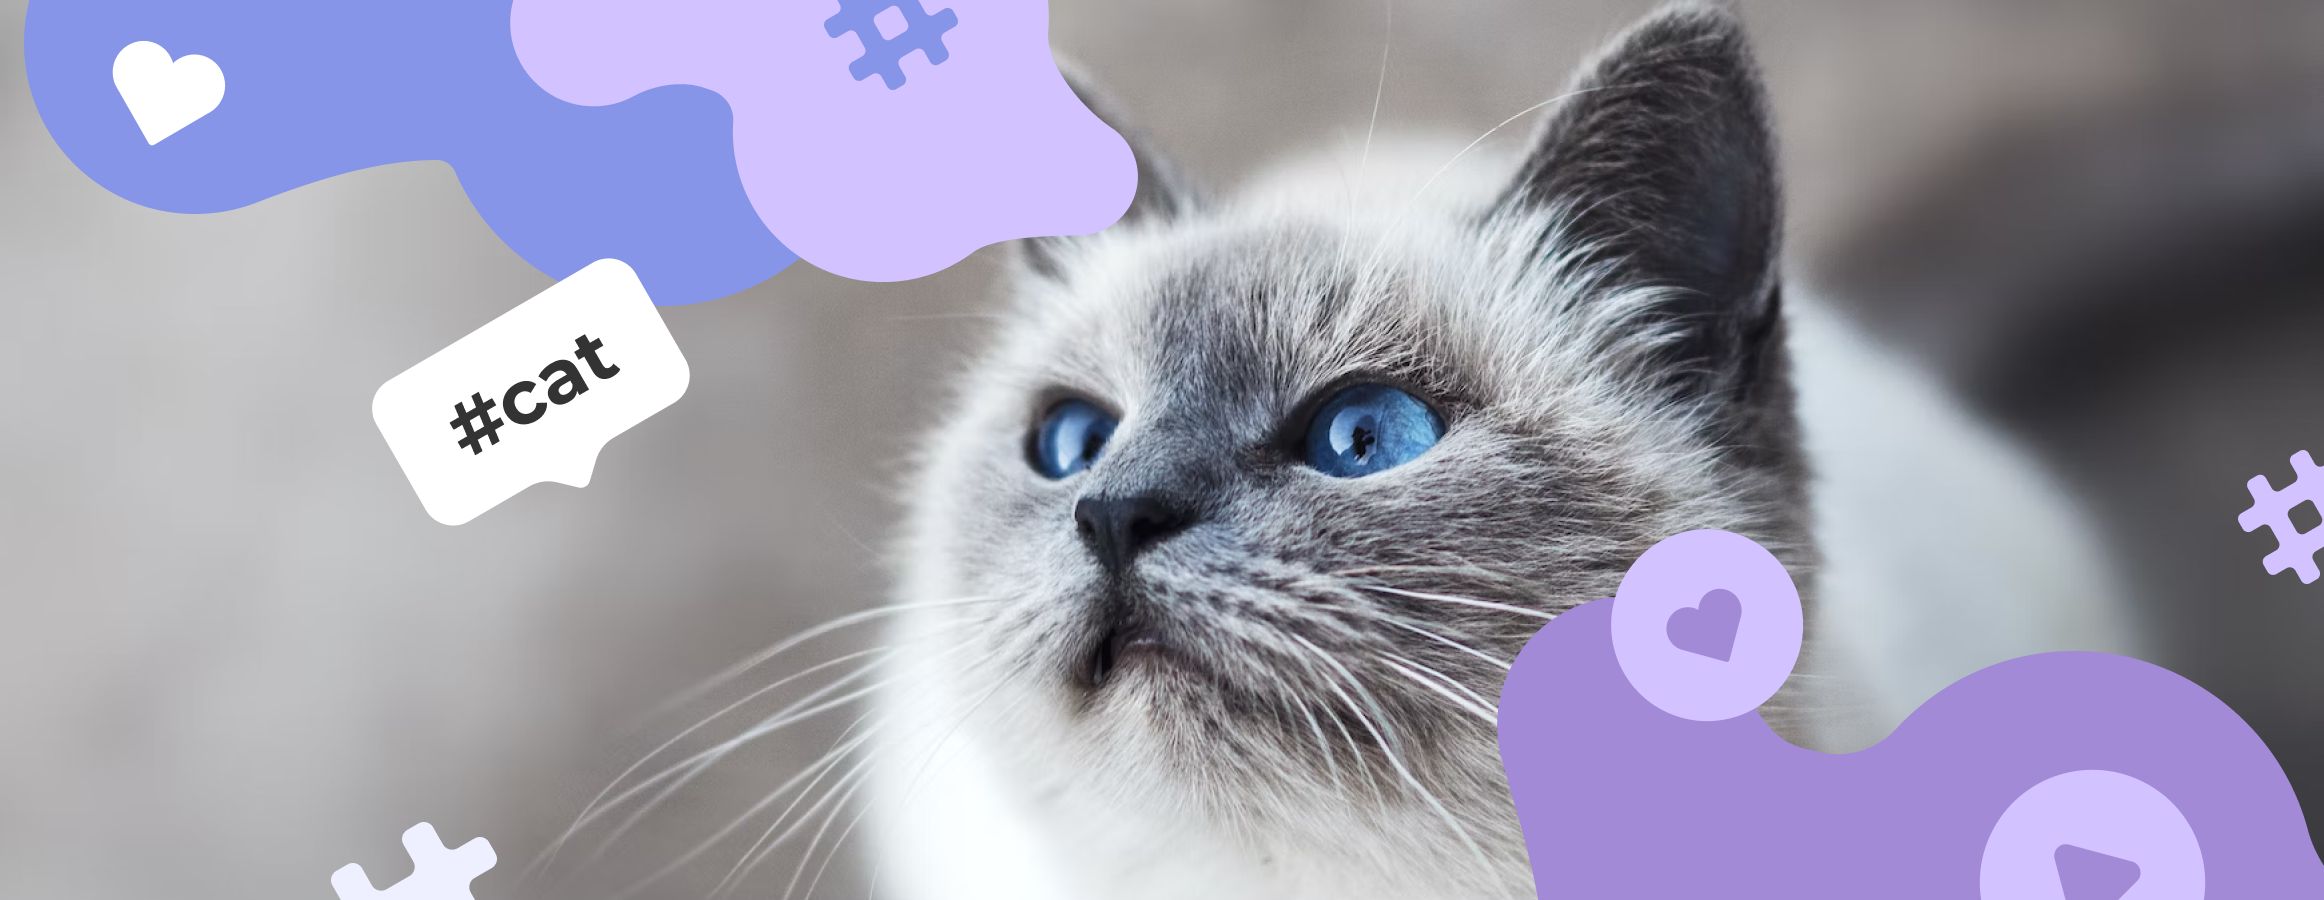 Cat hashtags for Instagram | Inflact